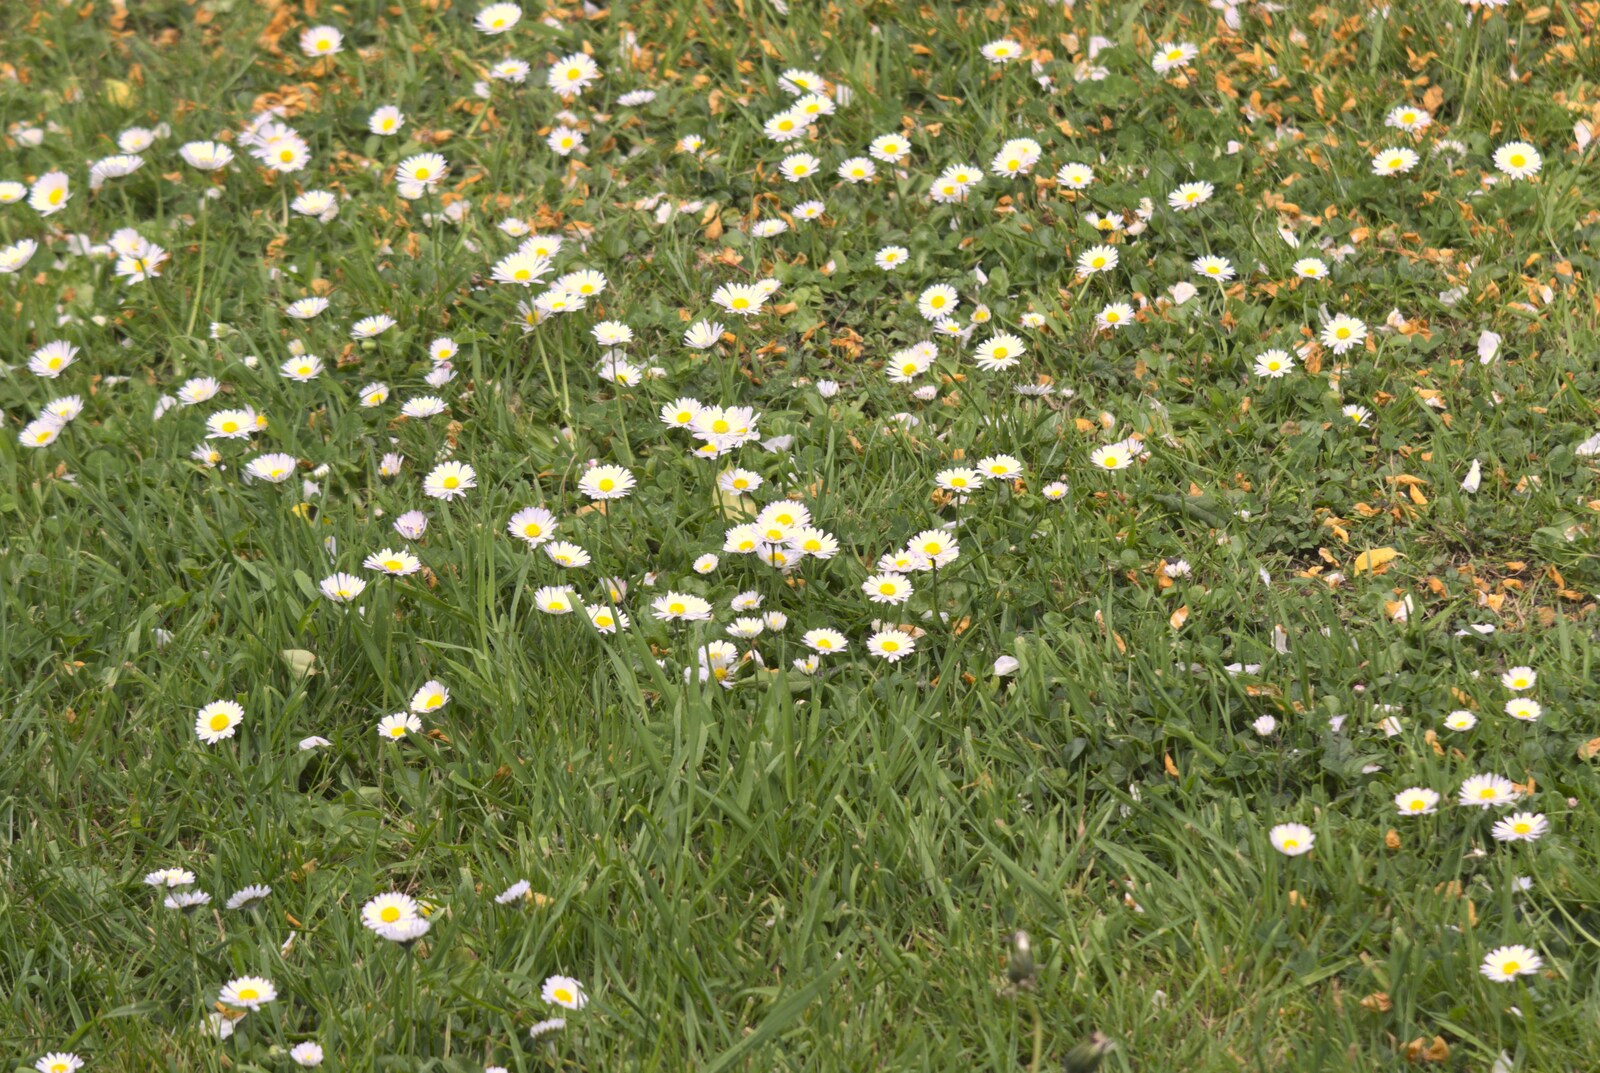 Daisies in the lawn from A Barbeque at Wavy and Martina's, Thrandeston, Suffolk - 30th May 2010